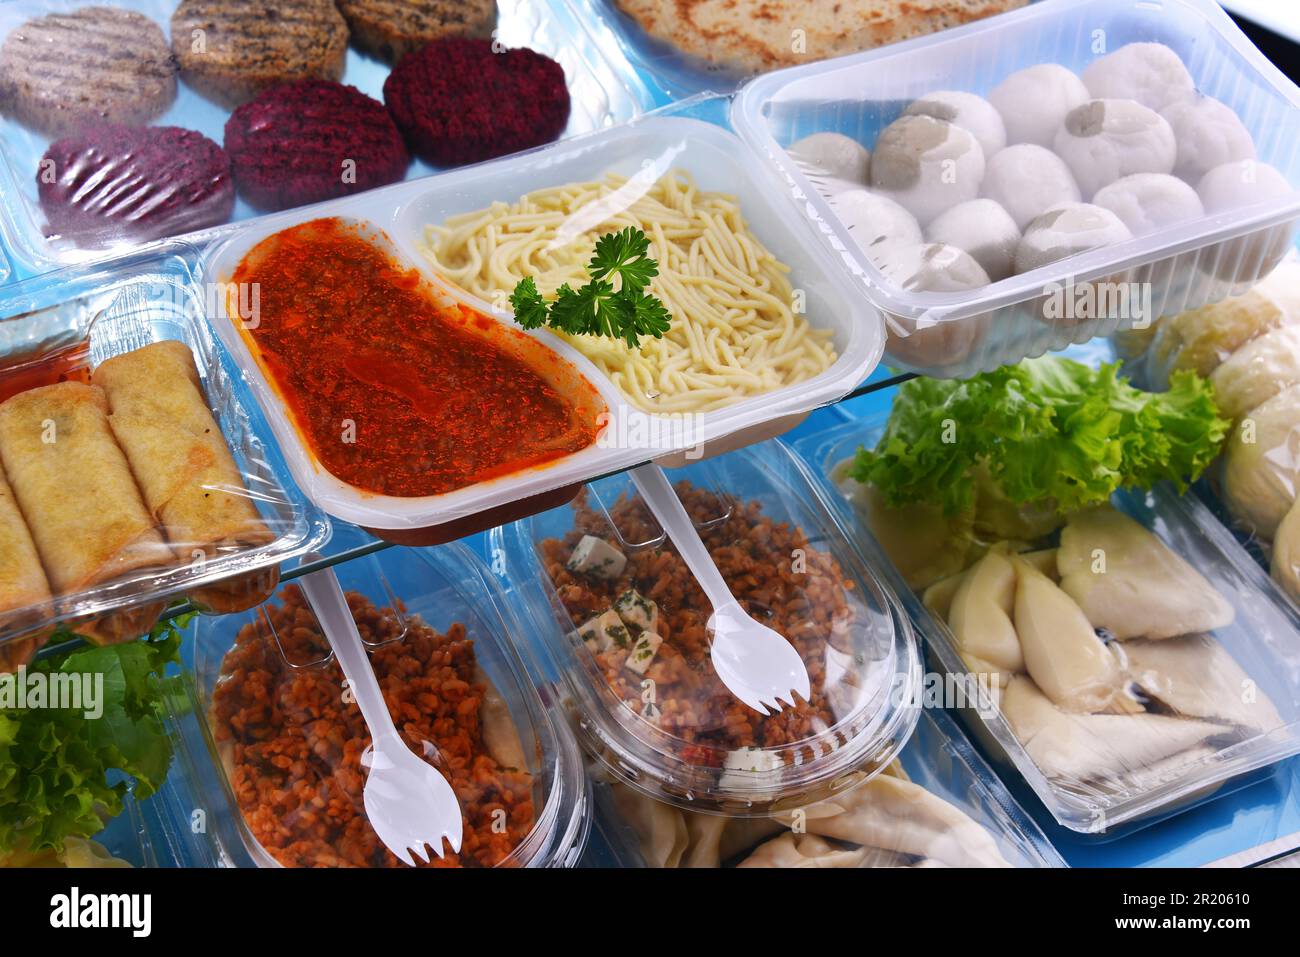 A variety of prepackaged food products in plastic boxes Stock Photo